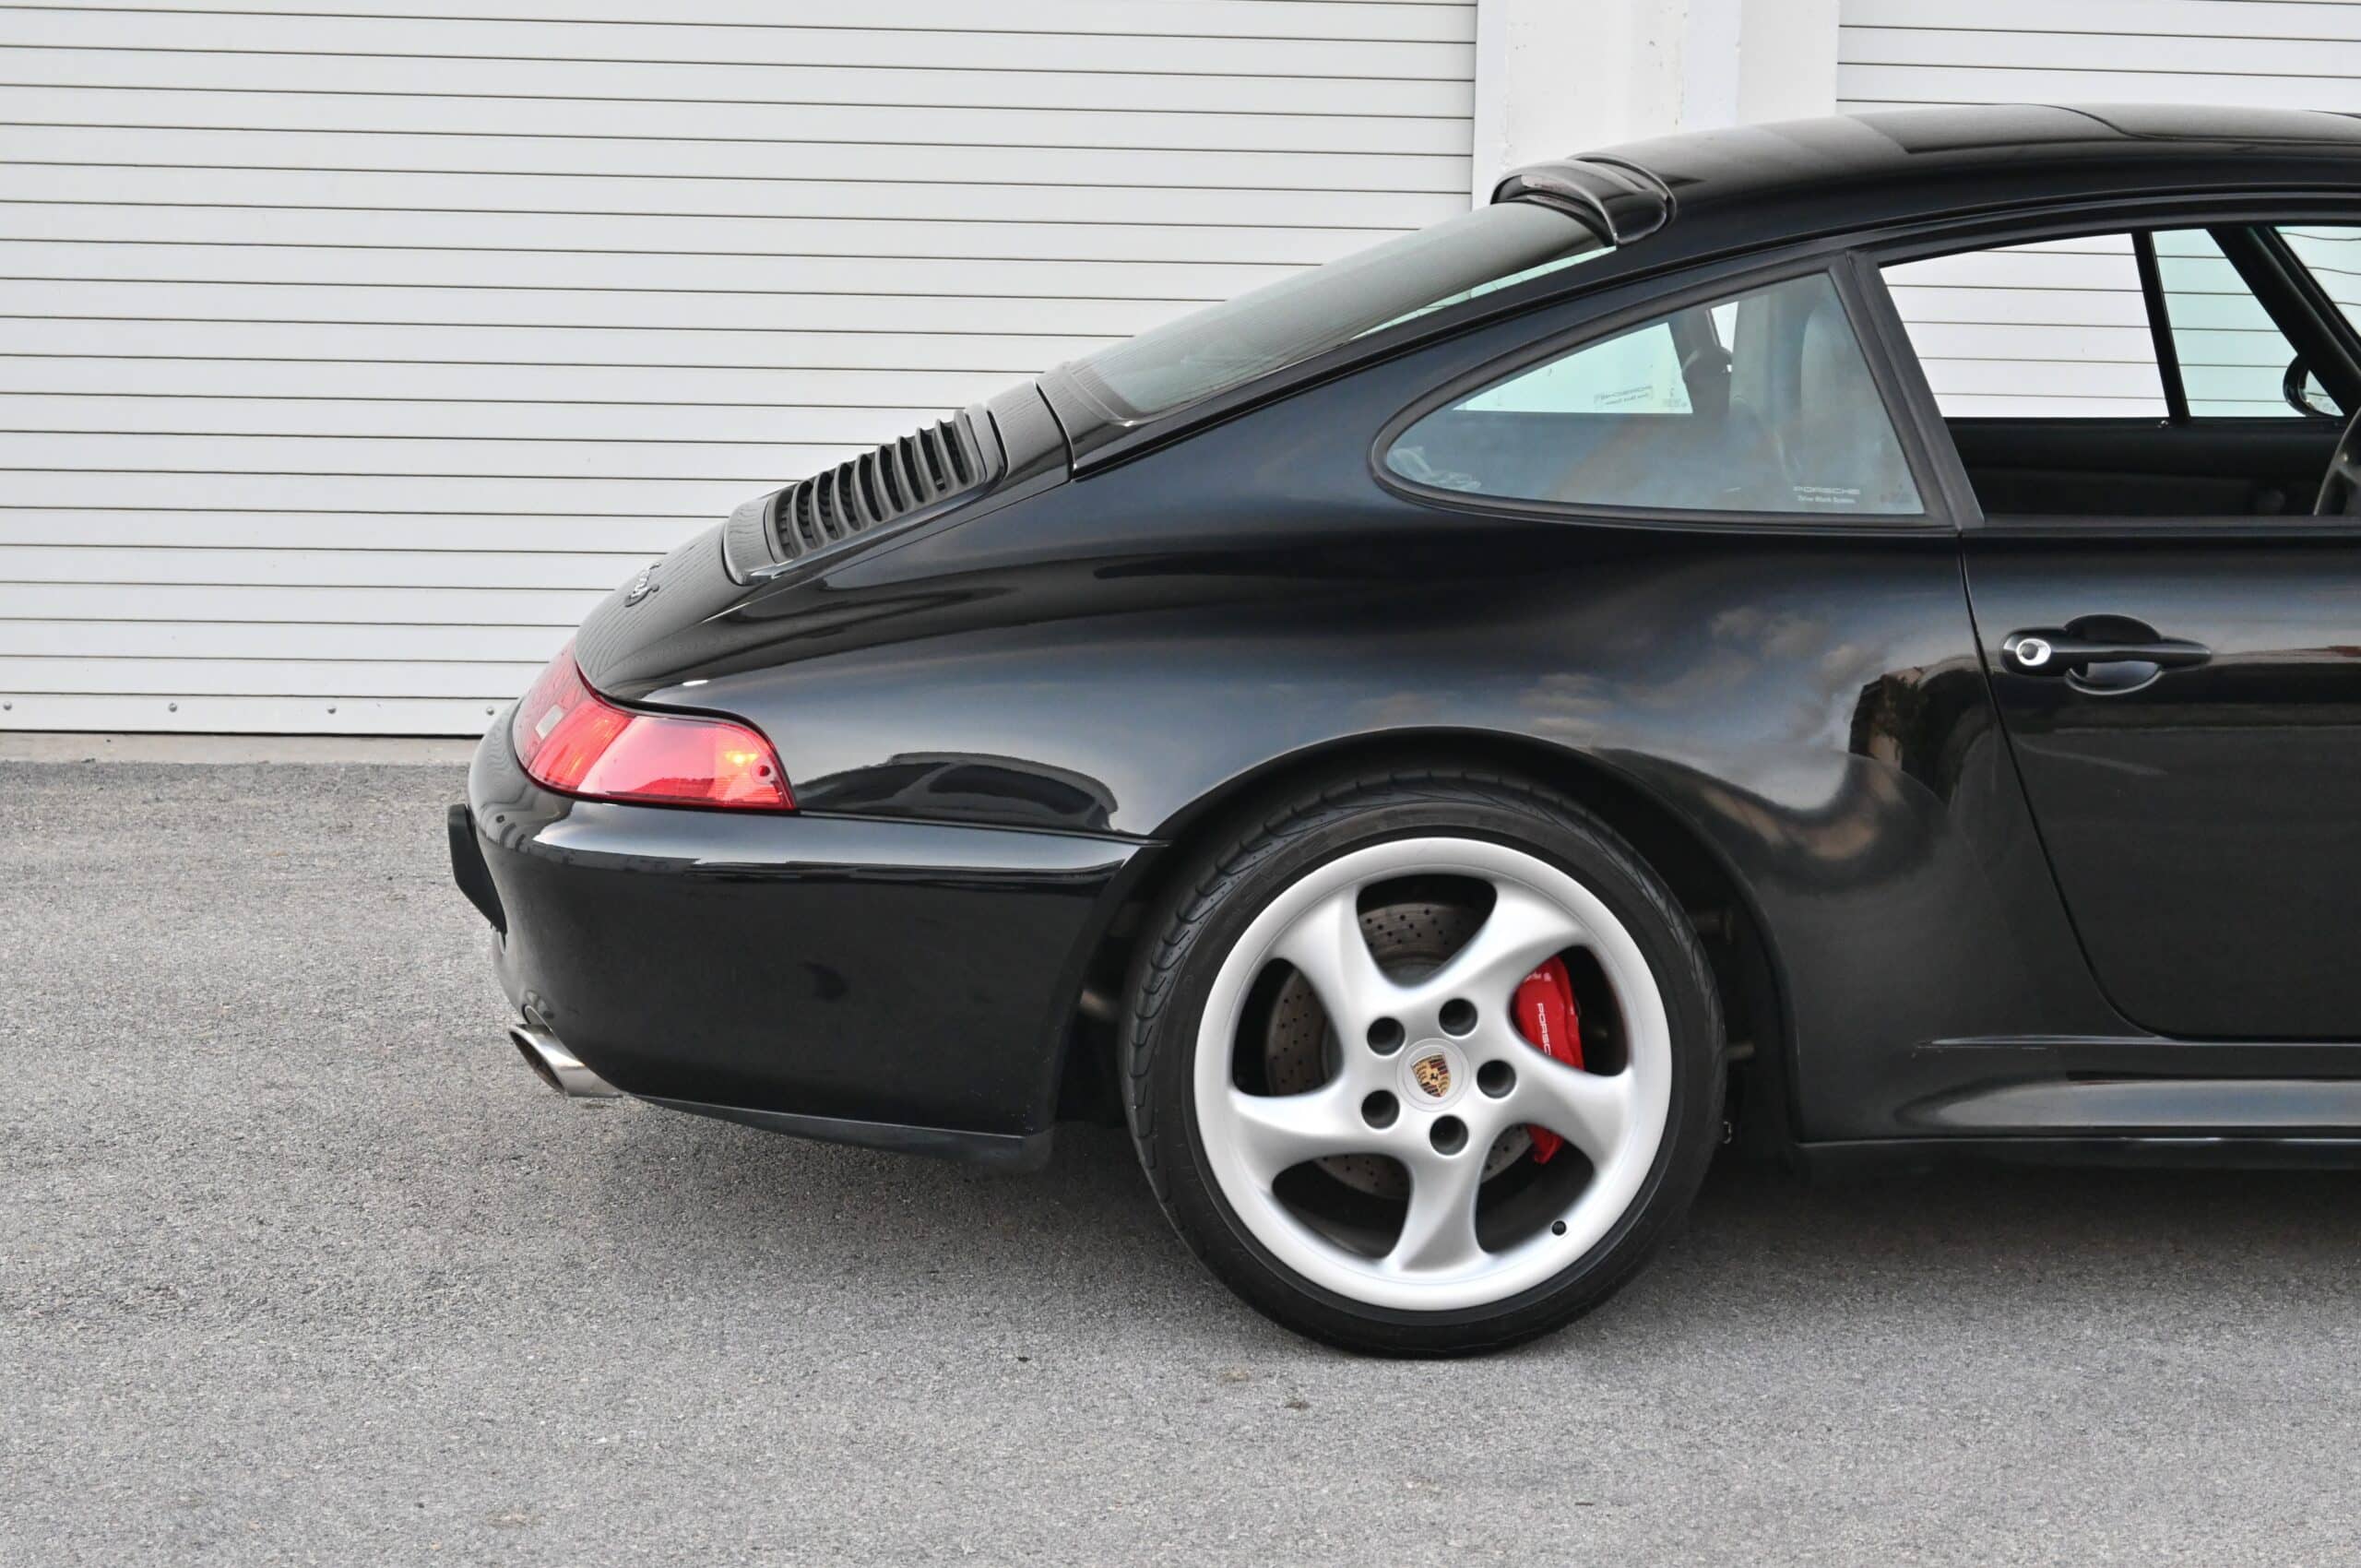 1998 Porsche 911 993 C4S Widebody Only 45k Miles – Carrera 4S -6 Speed Manual – Original All Stock – Like New